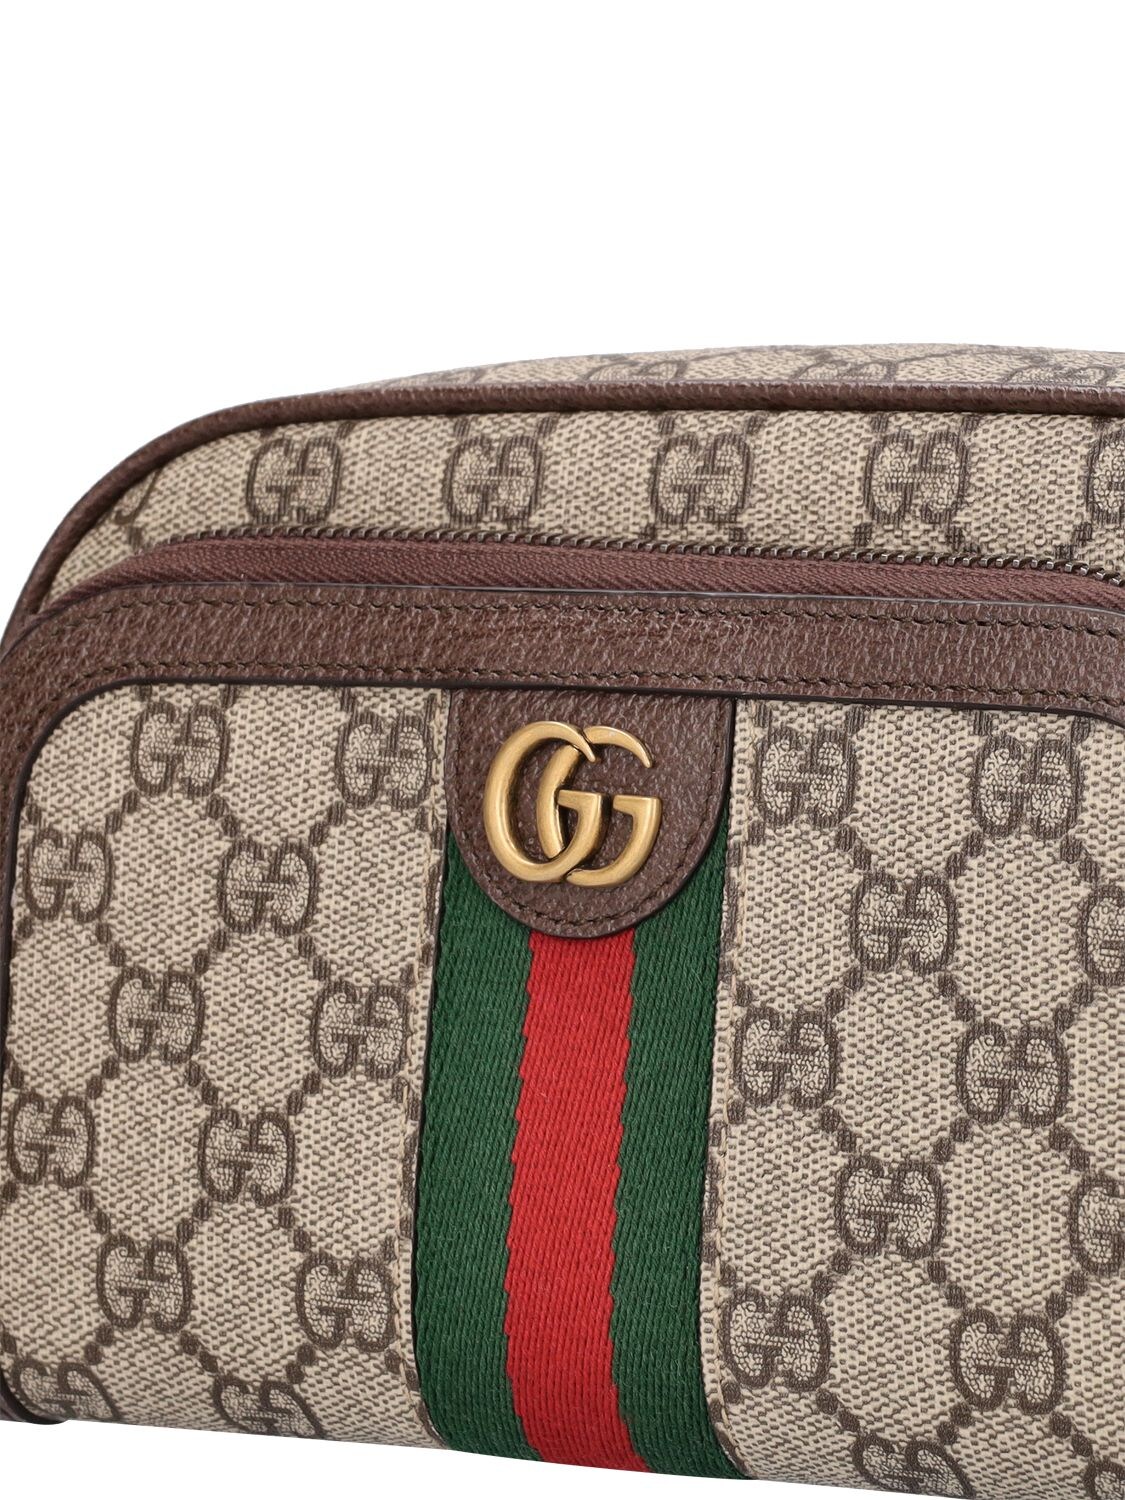 GG Canvas Toiletry Bag in Beige - Gucci